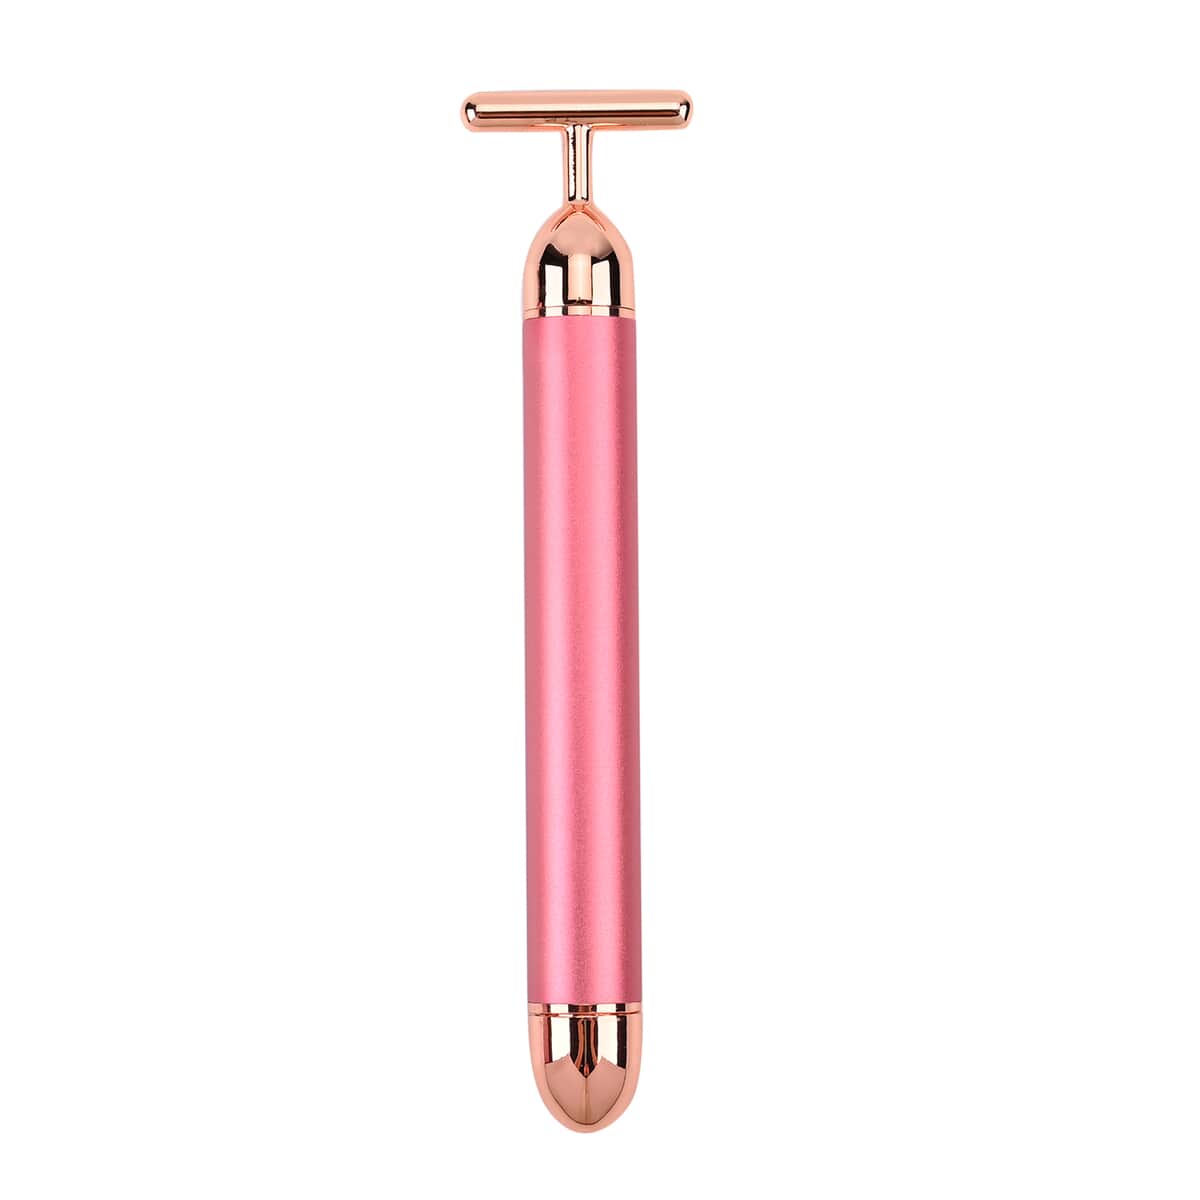 4-in-1 Face Massager Rollers with Four Interchangeable Massage Heads - Rose Gold, 1xAA Battery Not Including image number 3